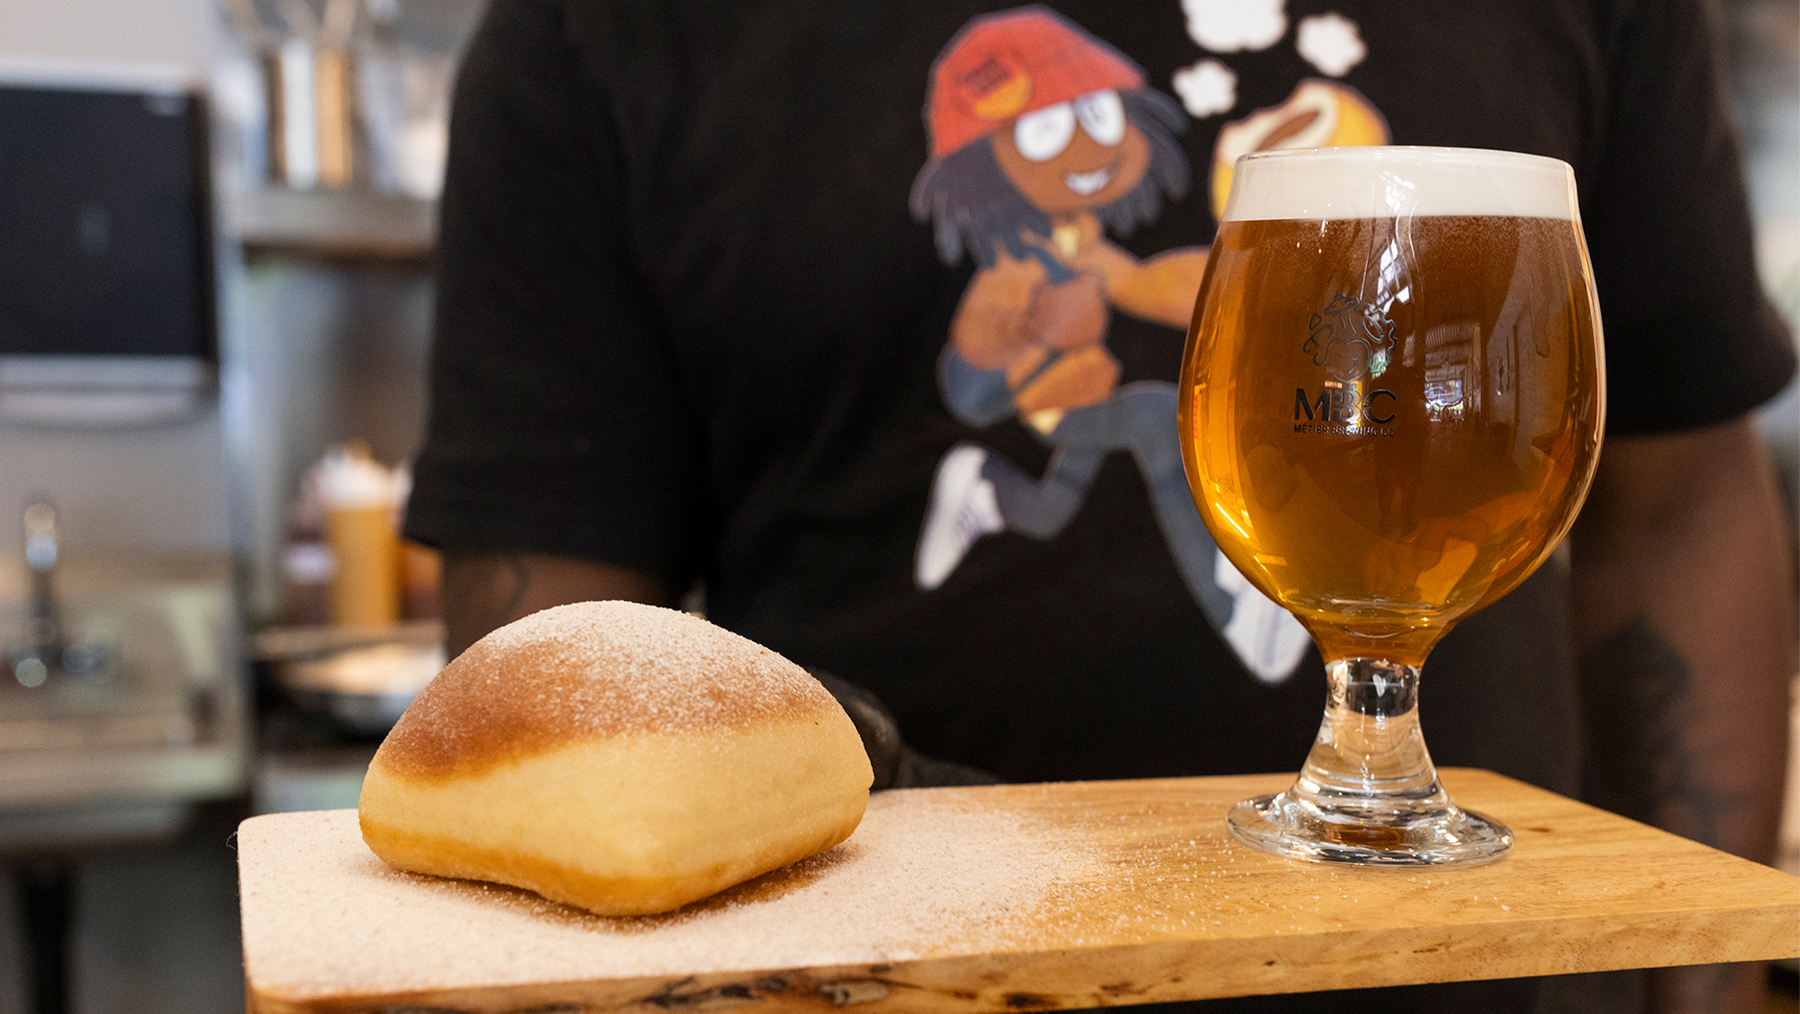 Short glass of honey-colored beer next to an Umami Kushi beignet